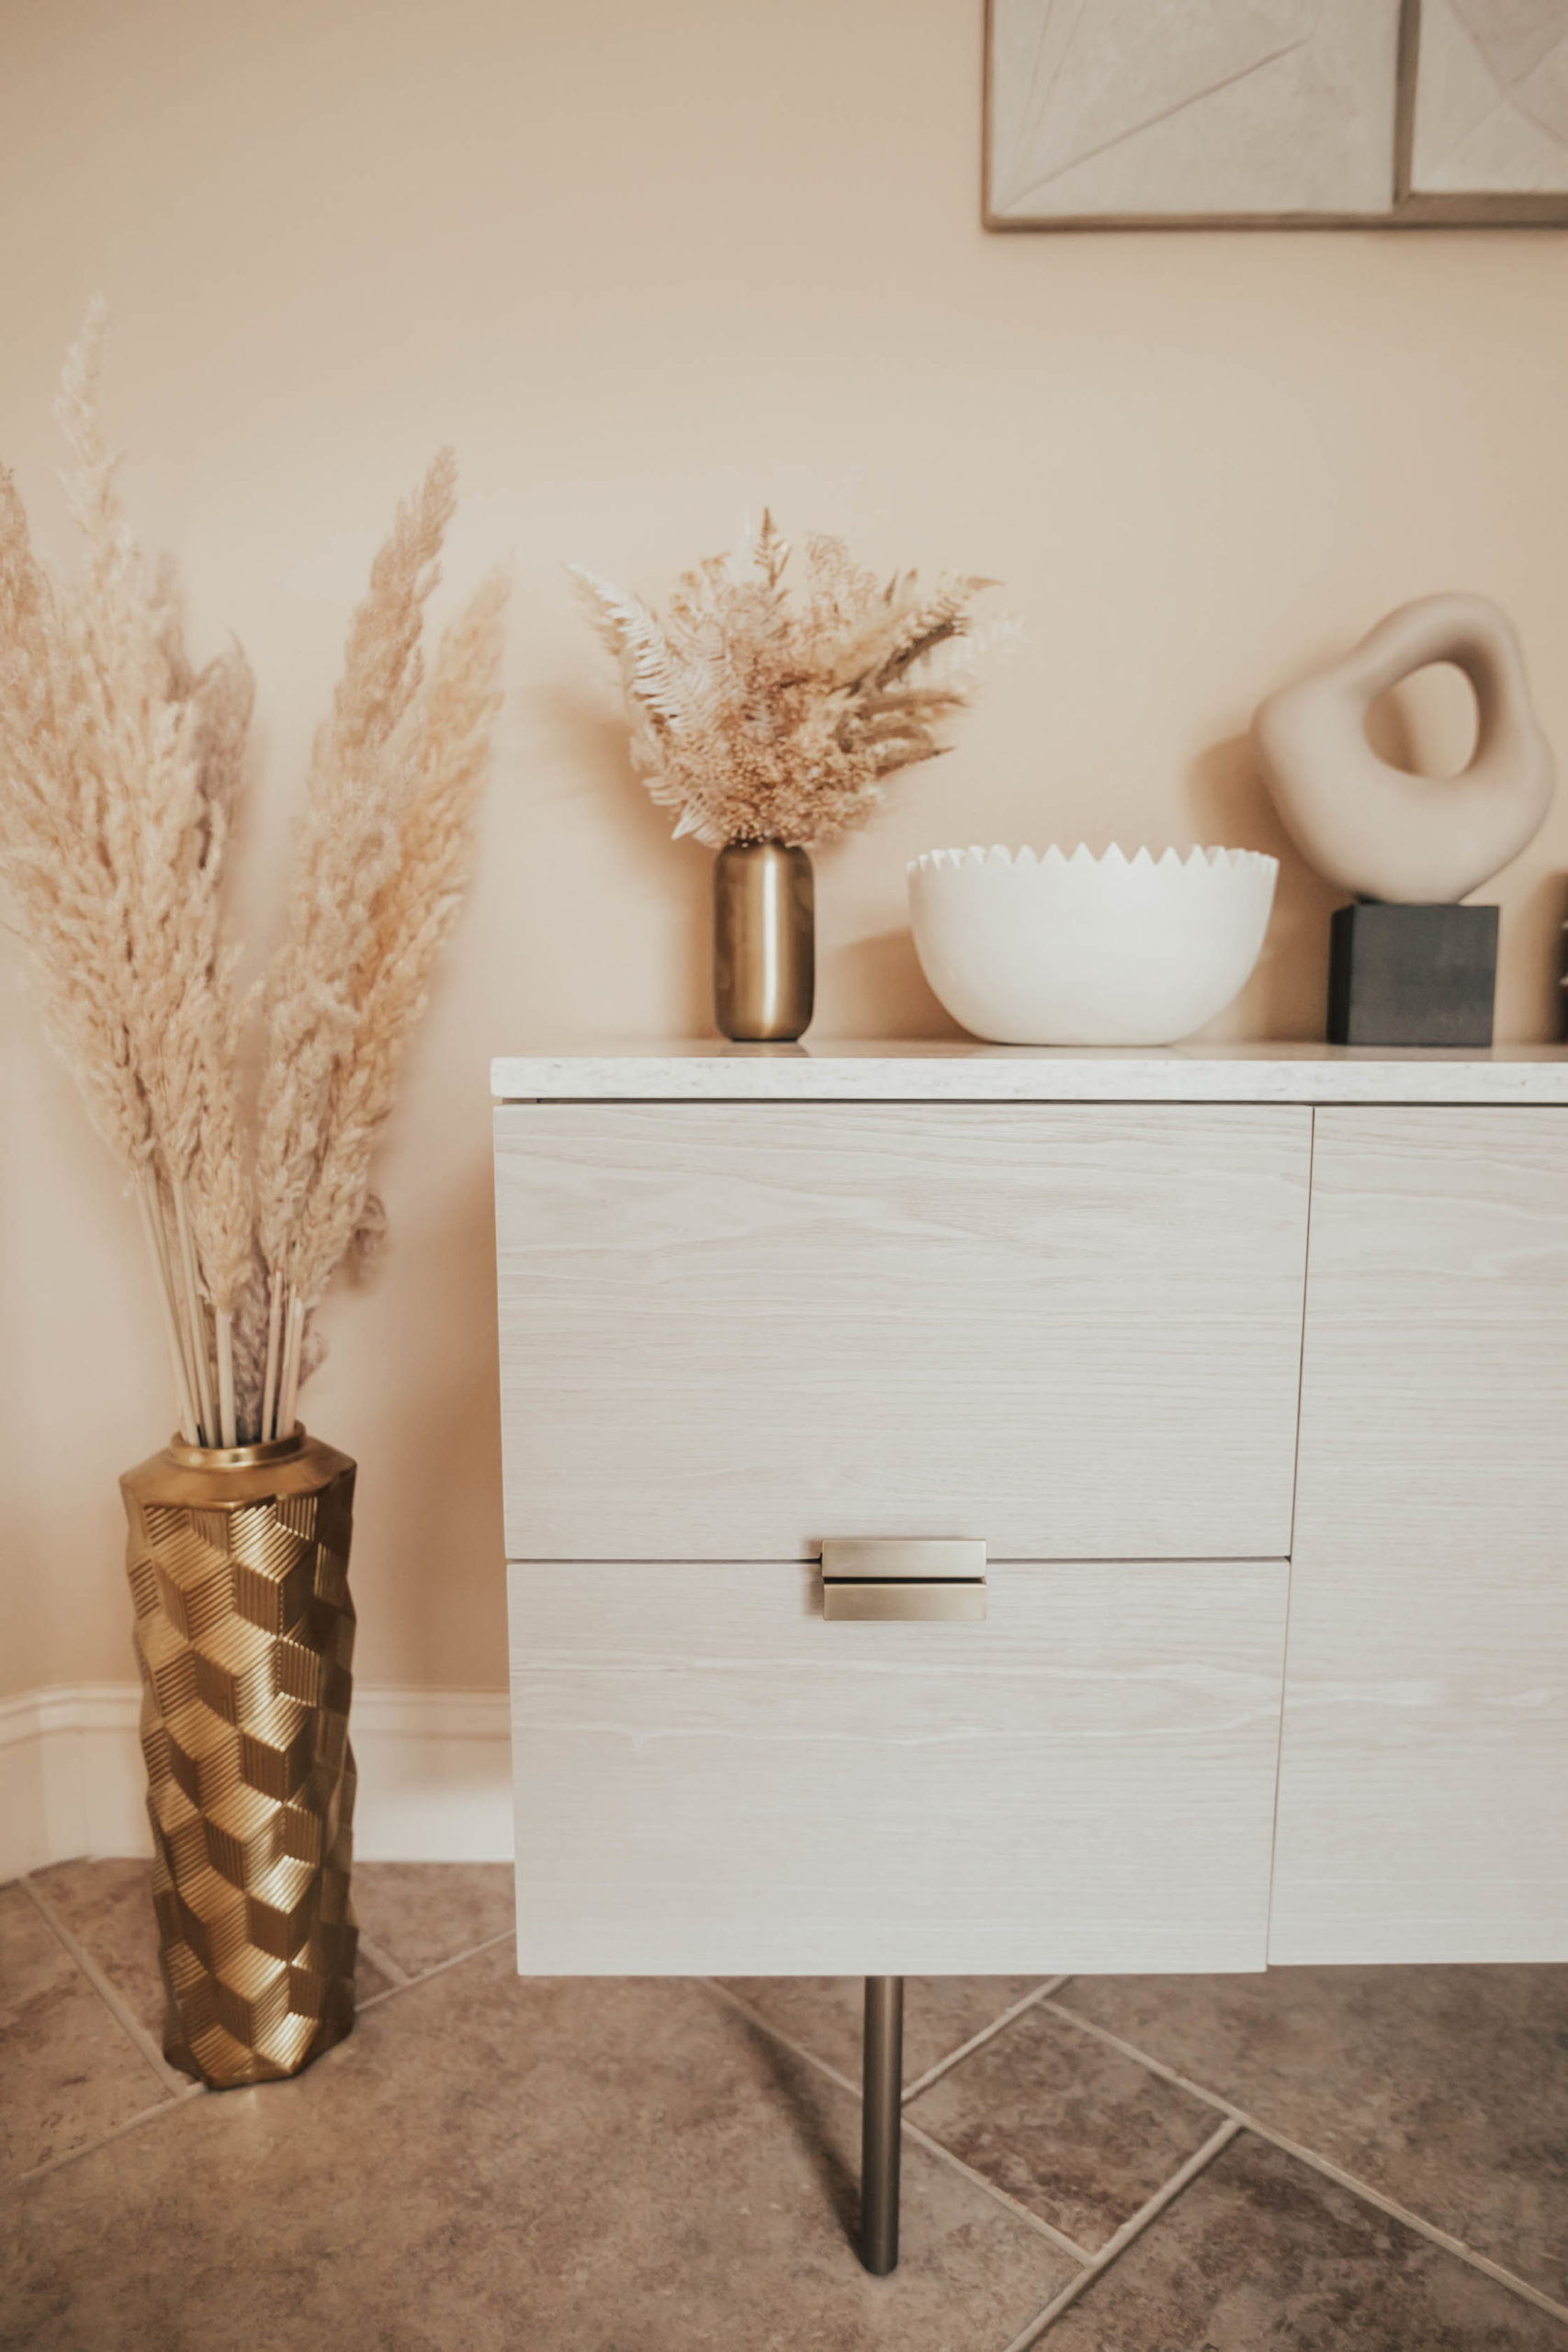 Reno blogger, Ashley Zeal Hurd, from the Ashley and Emily blog shares all of the items she purchased for her spring home refresh. 